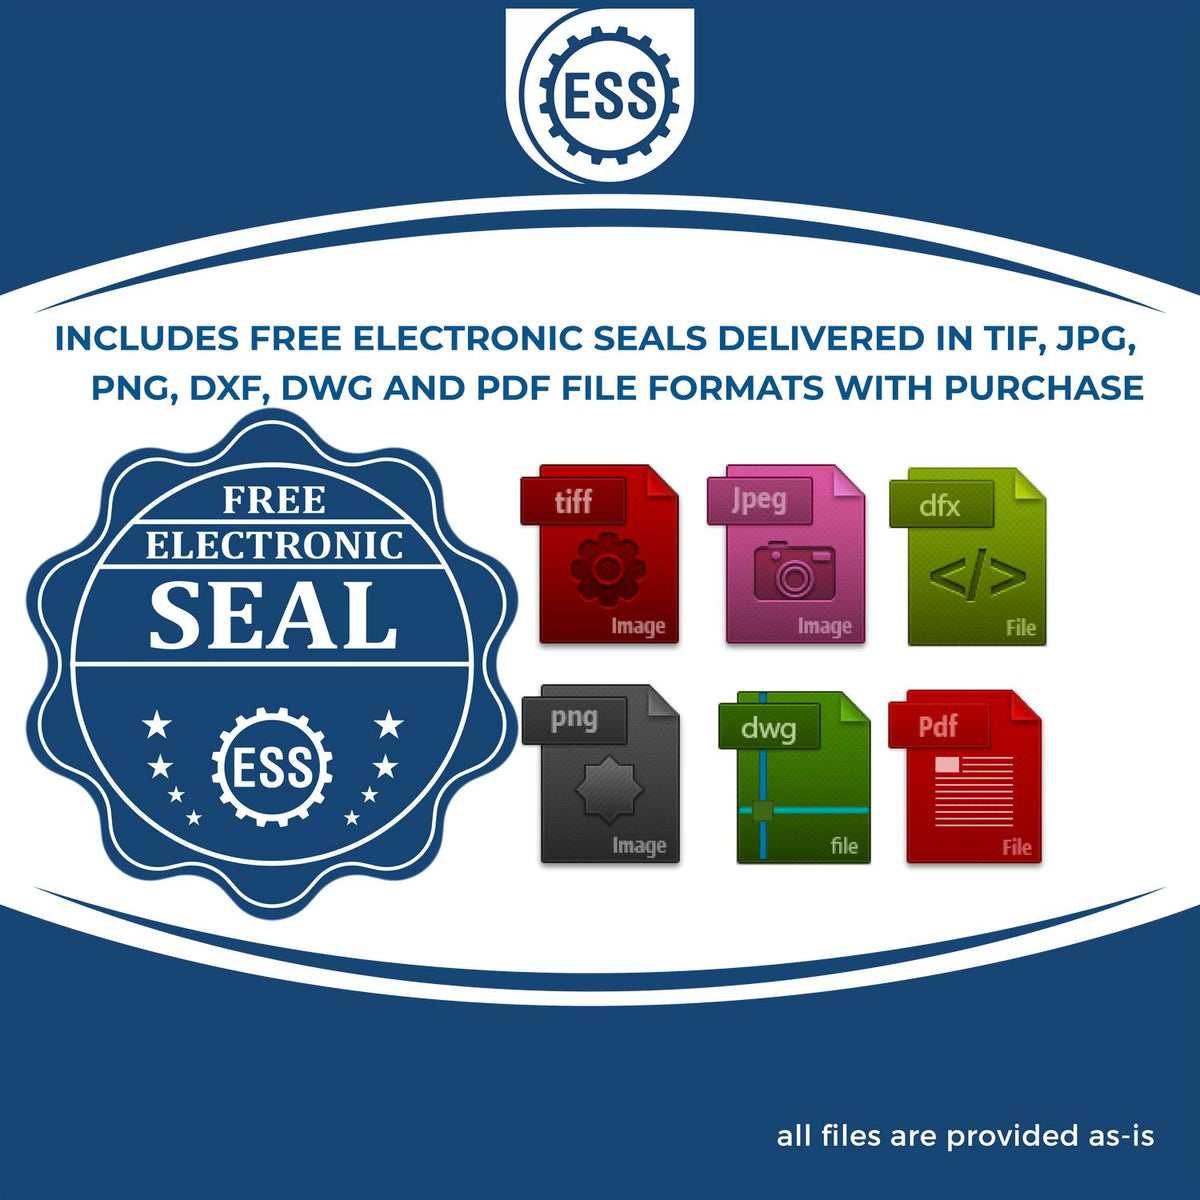 An infographic for the free electronic seal for the Heavy-Duty Montana Rectangular Notary Stamp illustrating the different file type icons such as DXF, DWG, TIF, JPG and PNG.